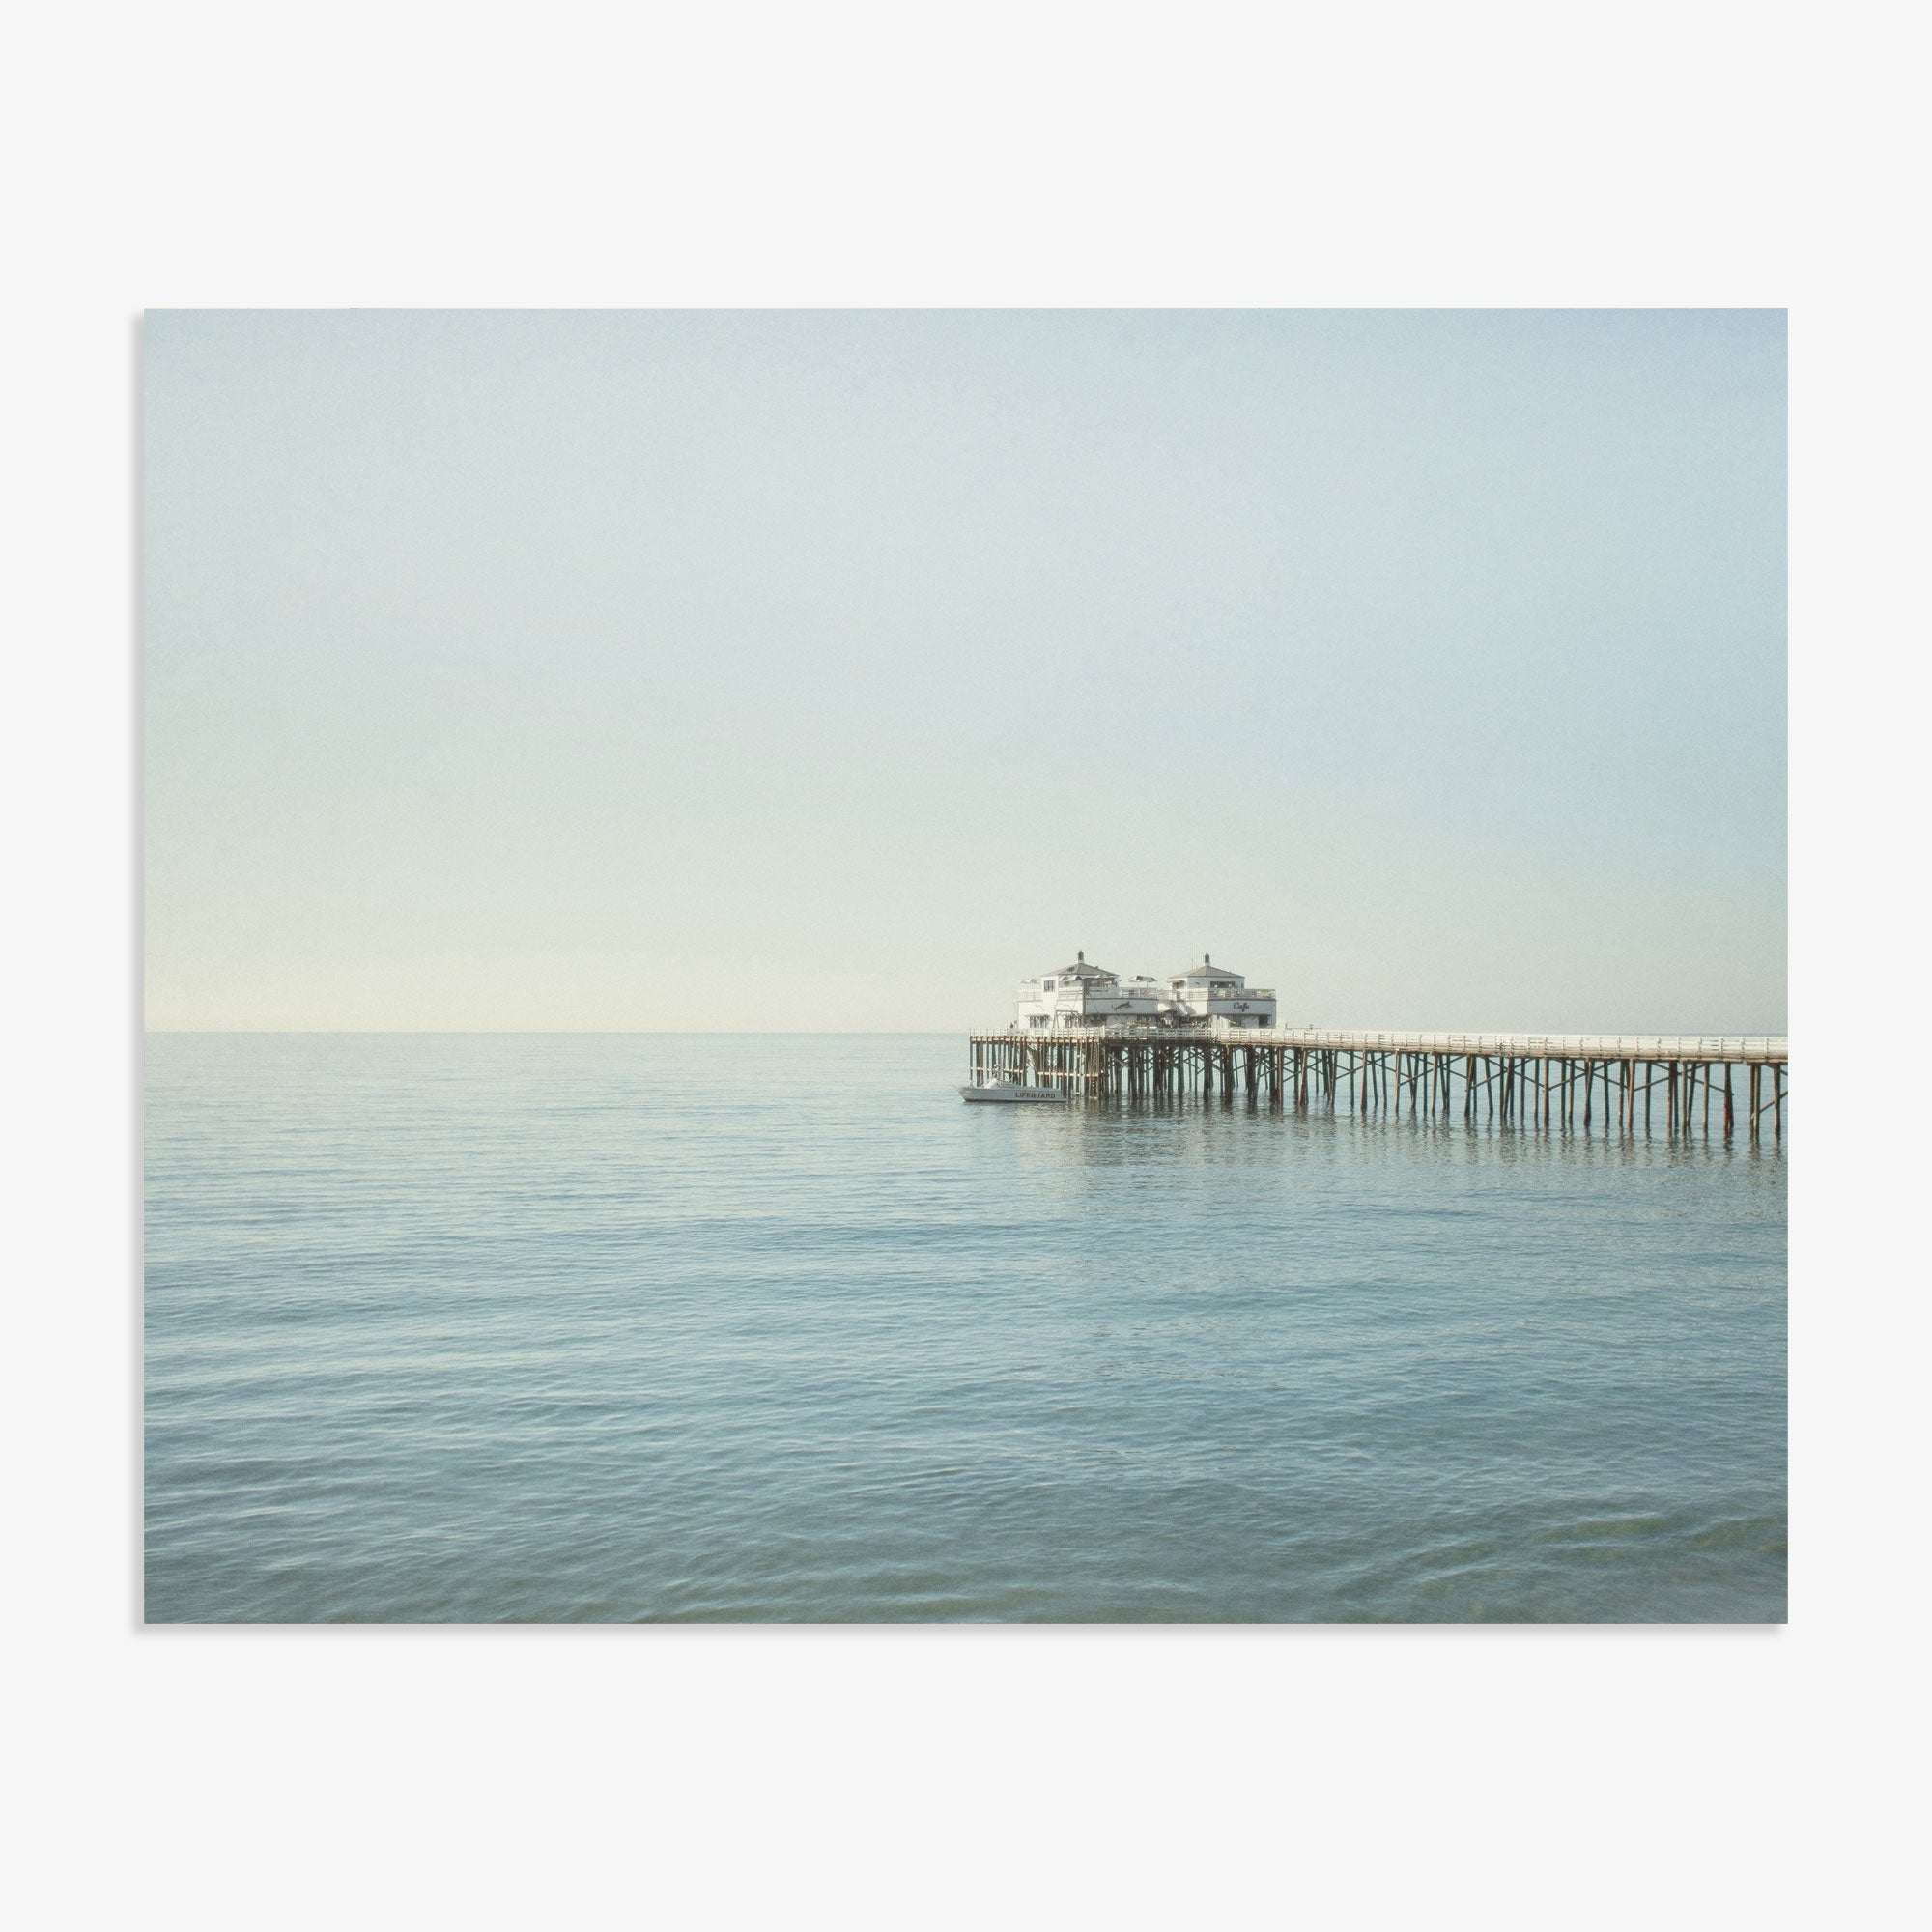 A tranquil seascape featuring Offley Green&#39;s &#39;Coastal Print of Malibu Pier in California &quot;All Calm in Malibu&quot; extending into calm waters with a large structure at the end under a clear sky.